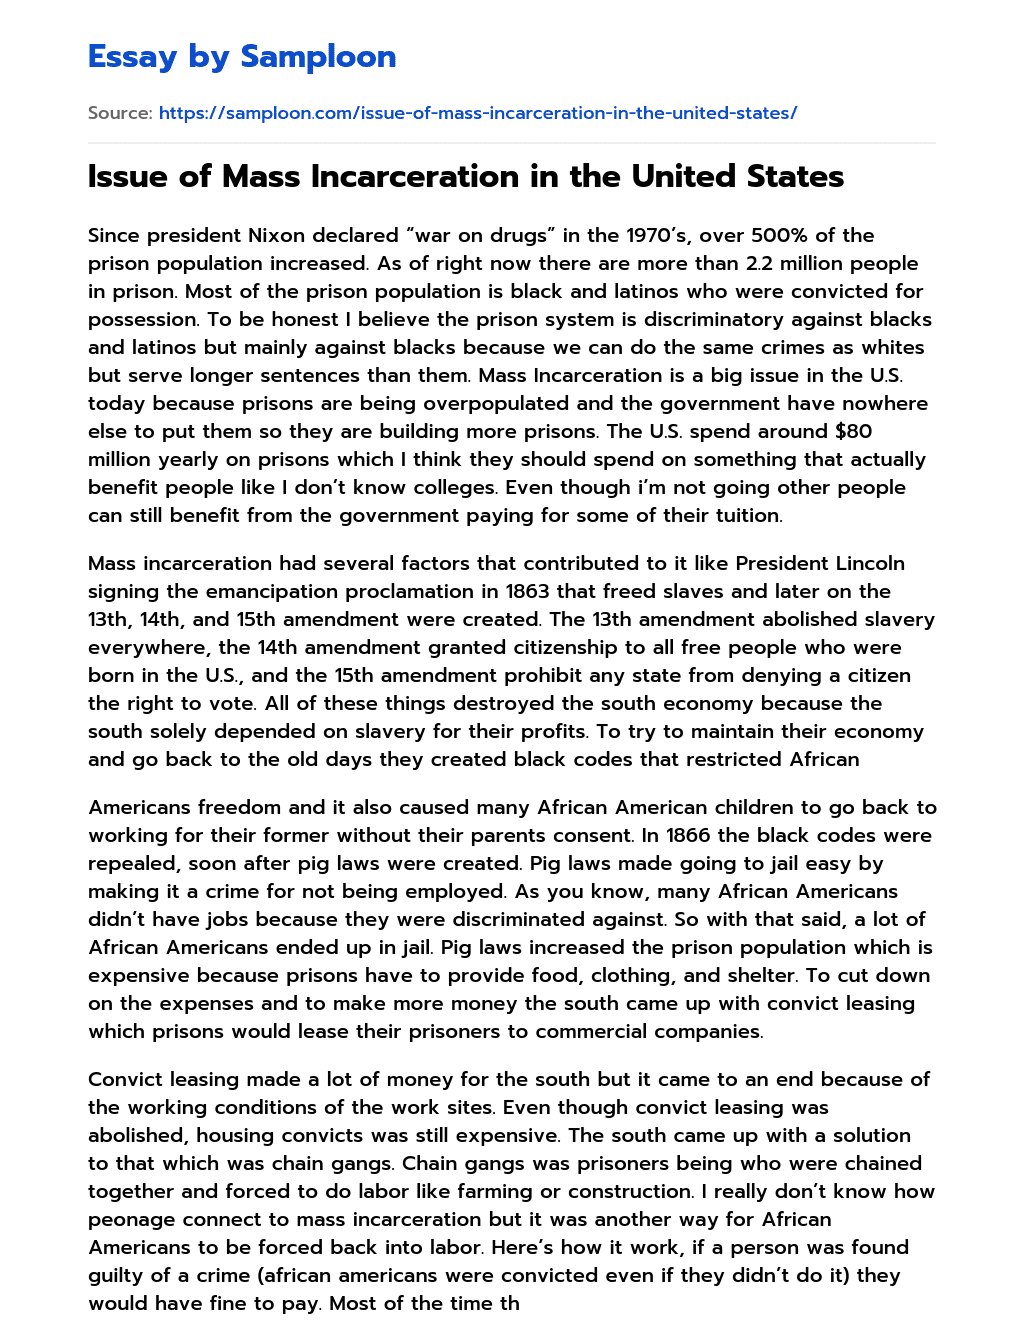 Issue of Mass Incarceration in the United States essay